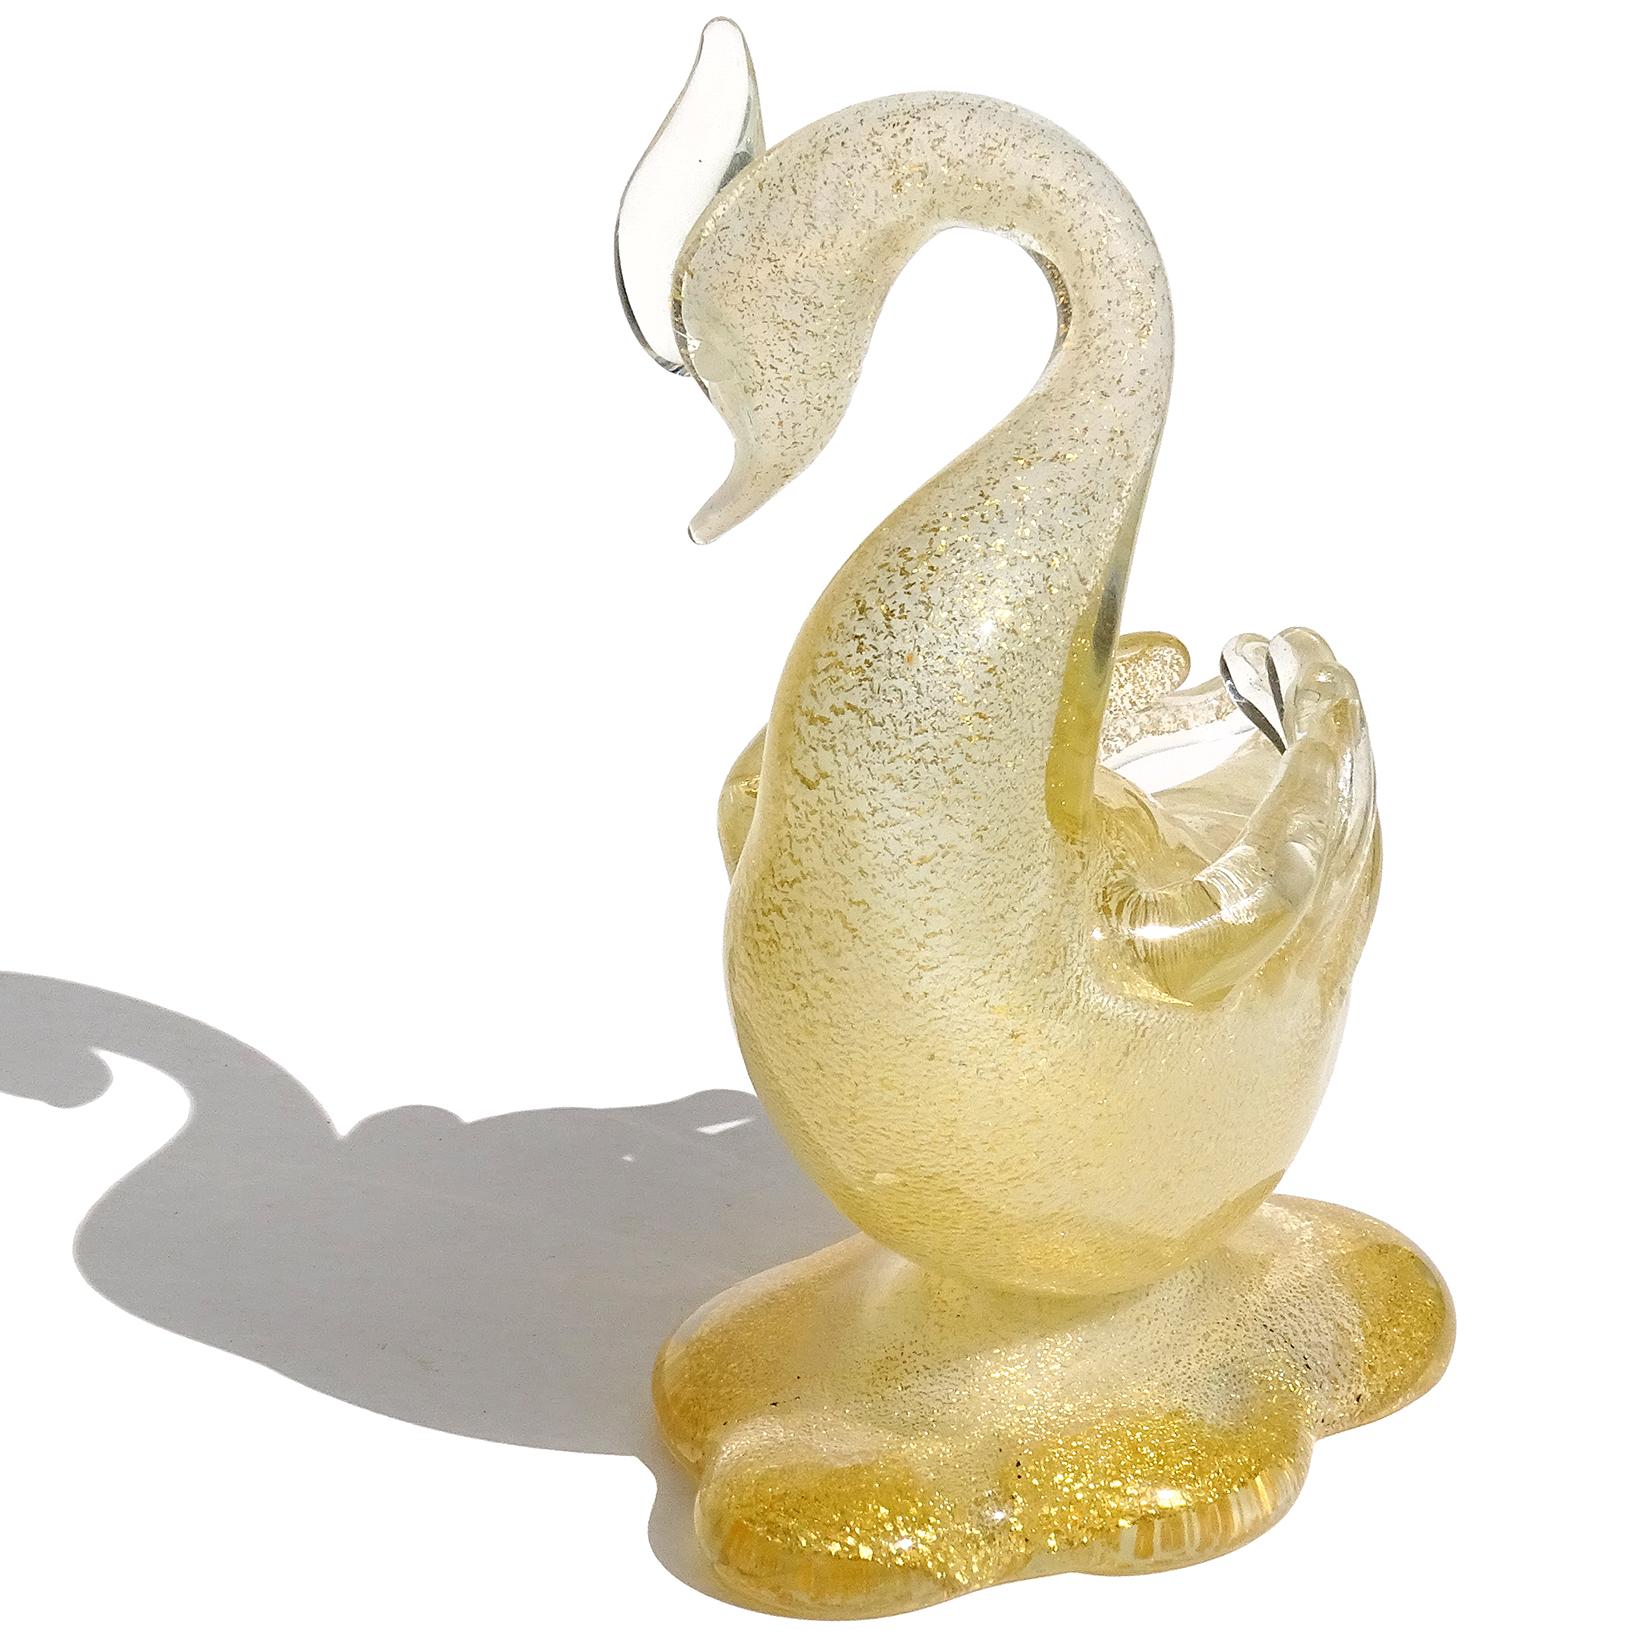 Beautiful vintage Murano hand blown opal white, and gold flecks Italian art glass swan sculpture / figurine. Documented to designer Archimede Seguso, circa 1957, and published (see last photo). The bird is profusely covered in gold leaf, with an